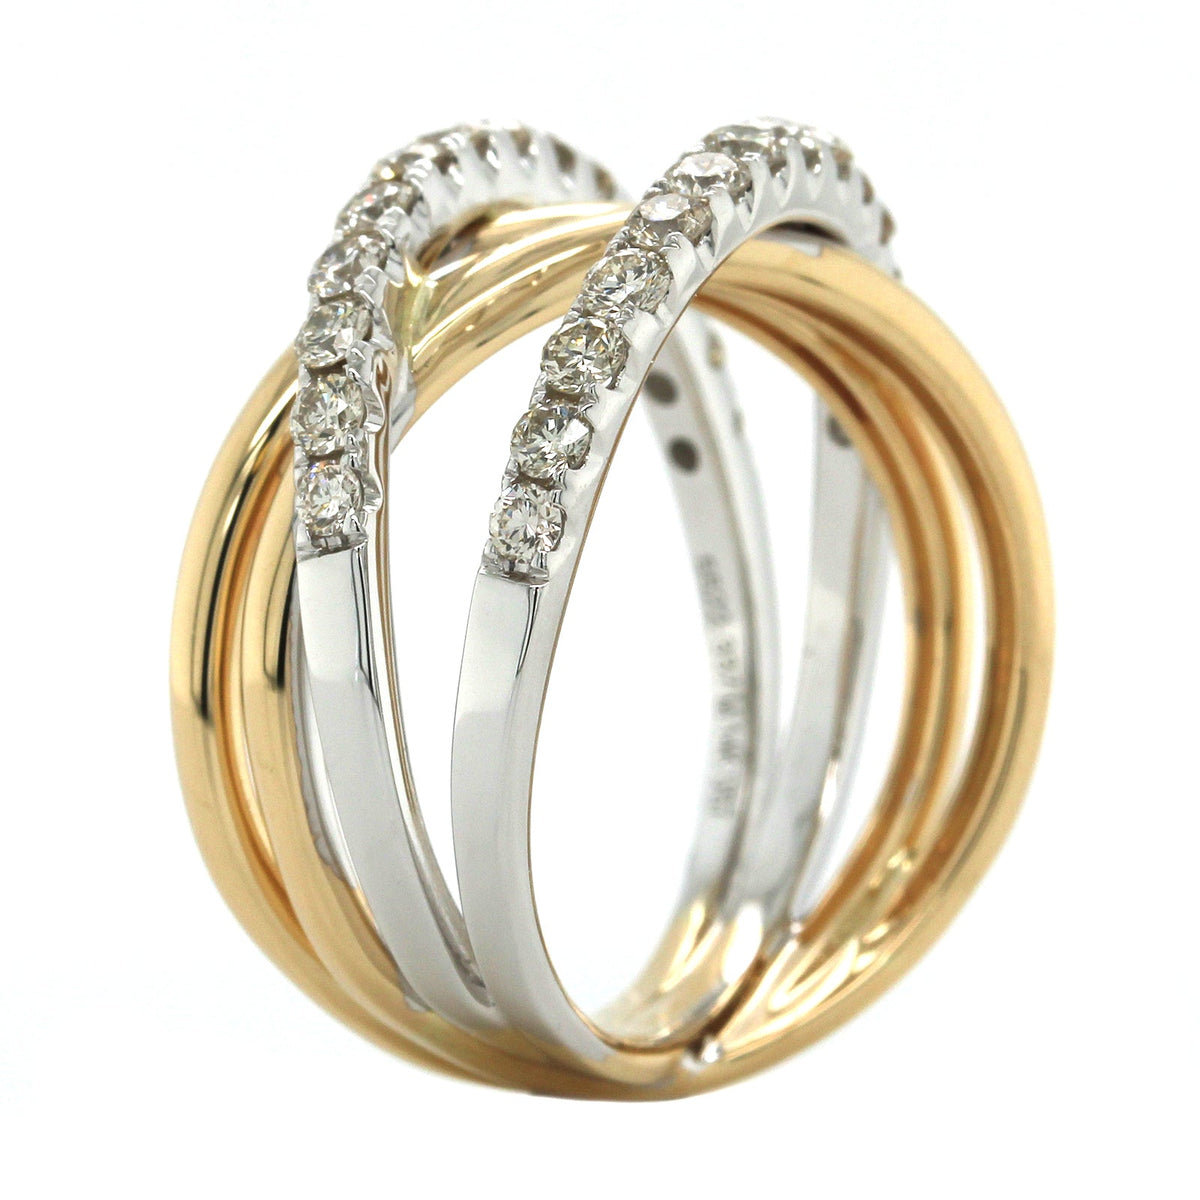 14K Two-Tone Gold Criss Cross Diamond Ring, 14k yellow and white gold, Long's Jewelers